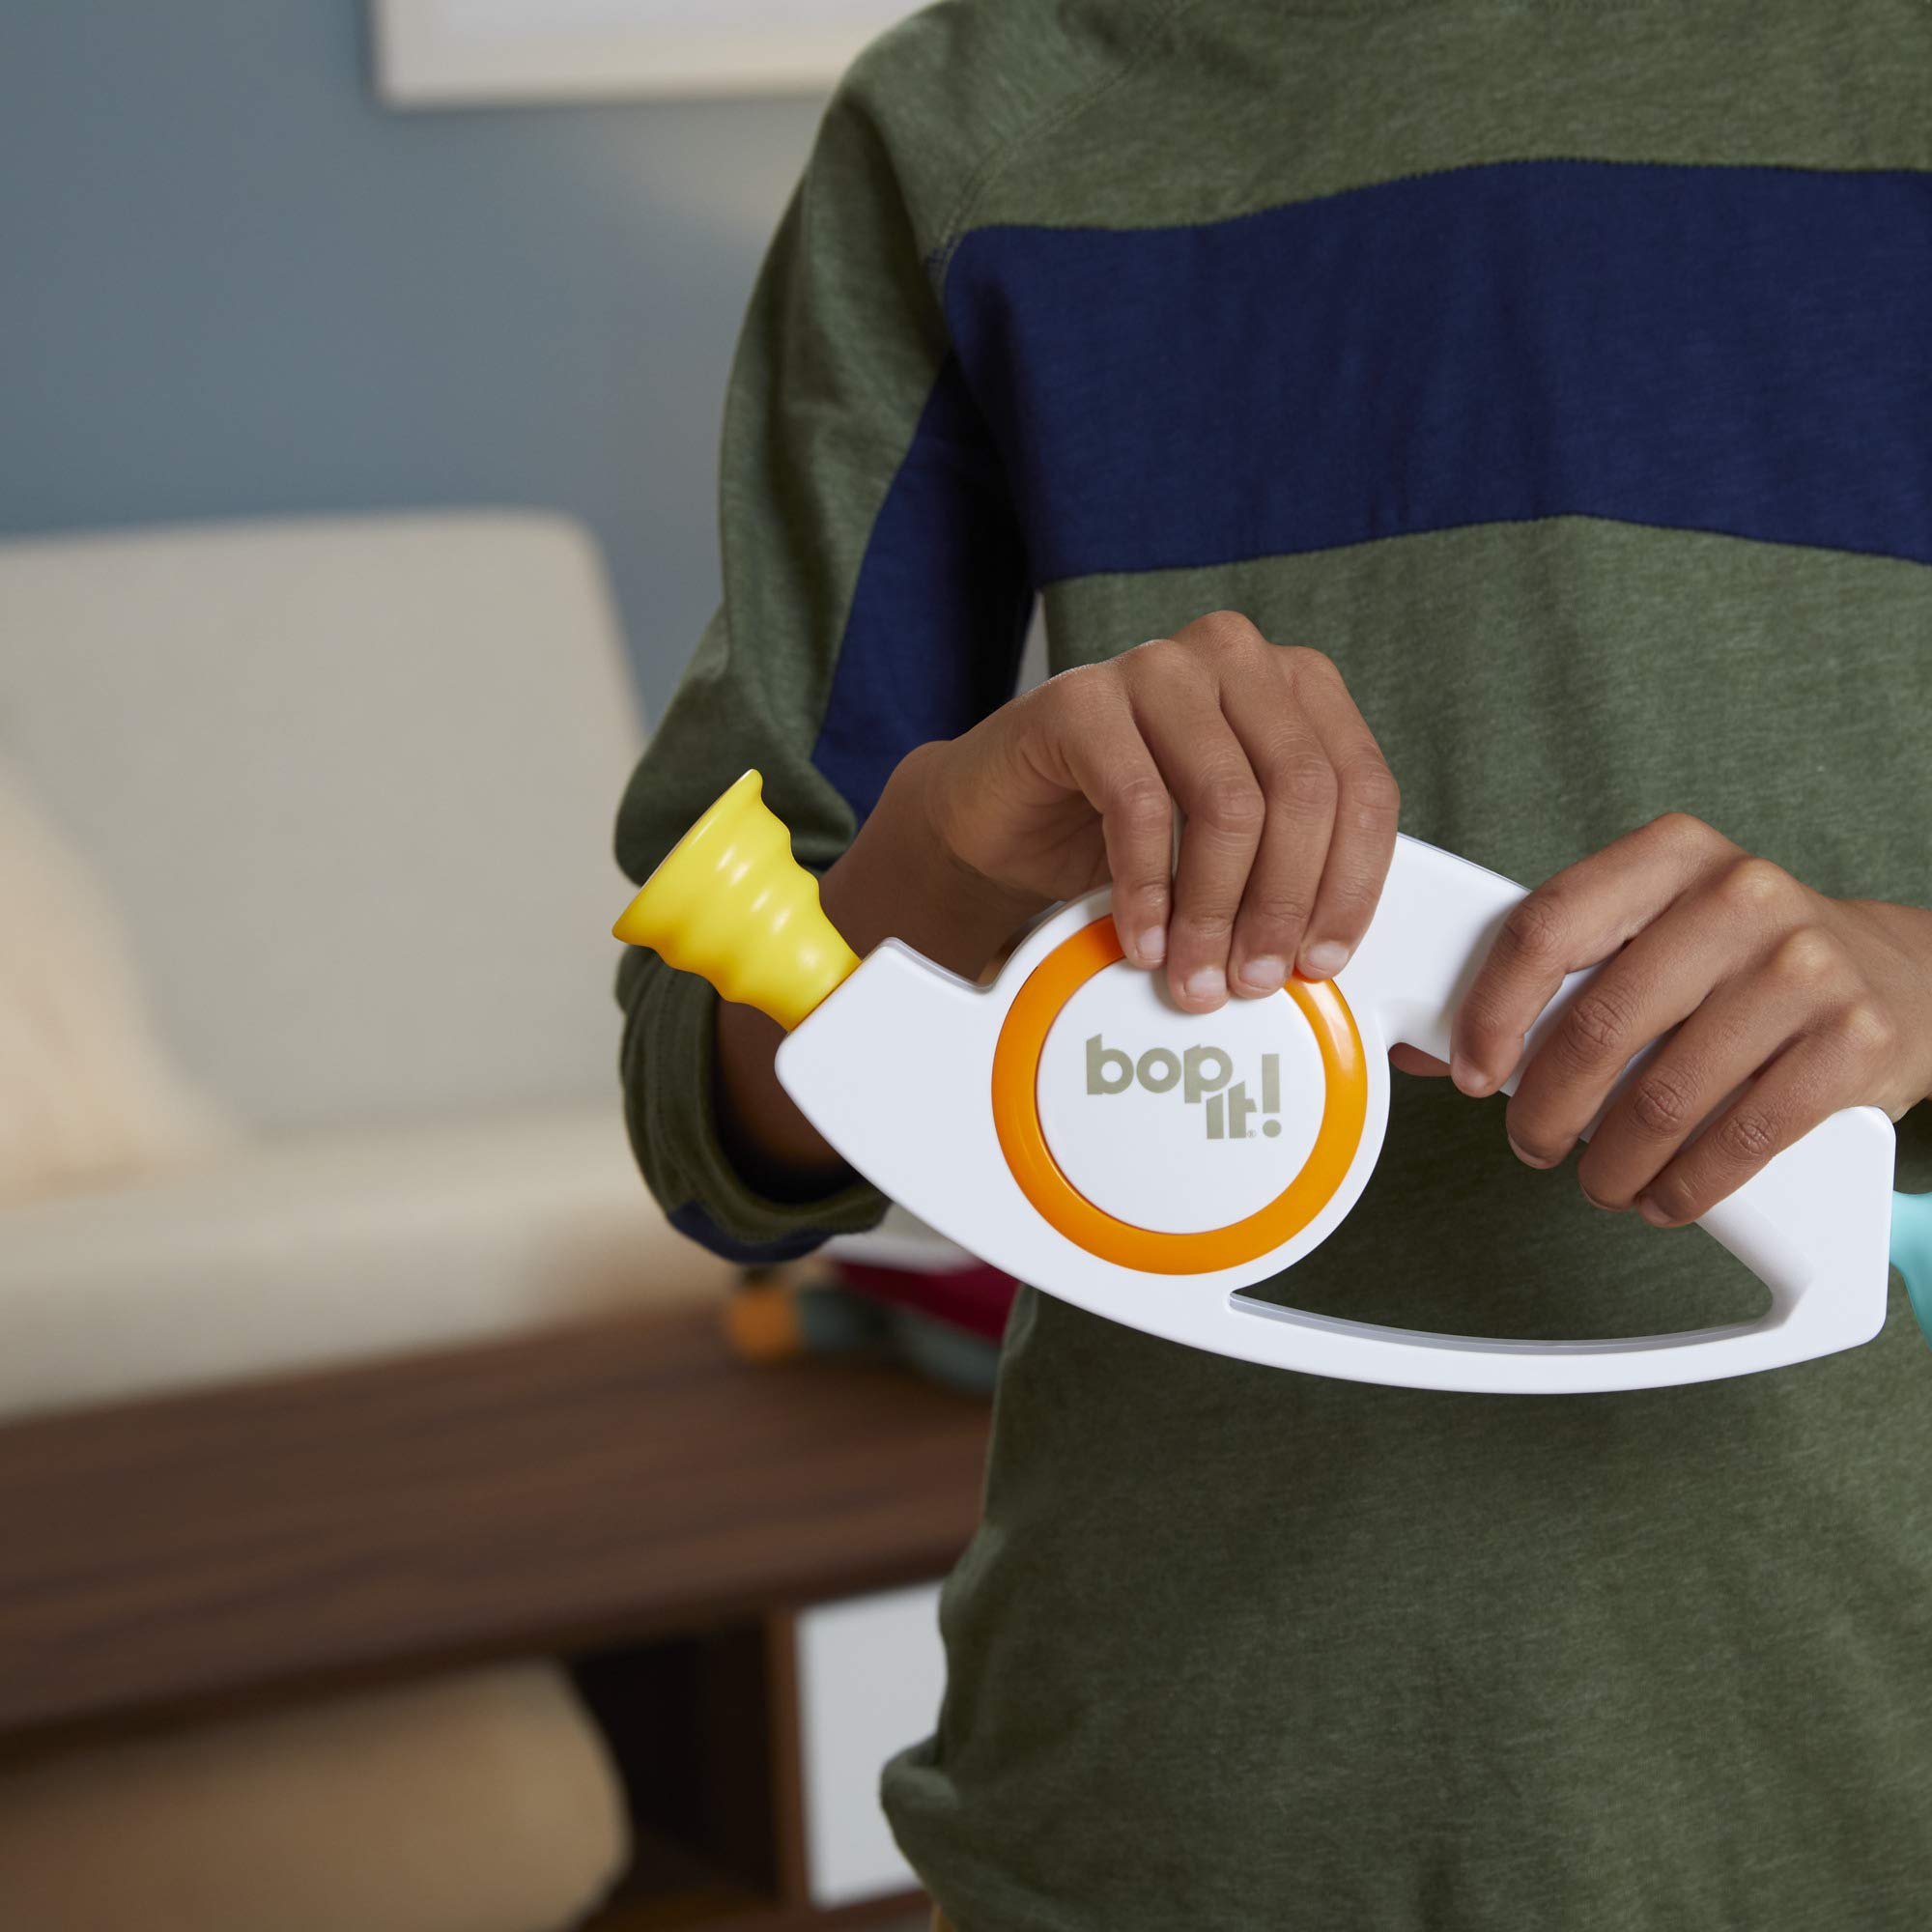 Hasbro Gaming Bop It! Electronic Game for Kids Ages 8 & Up, Brown/a